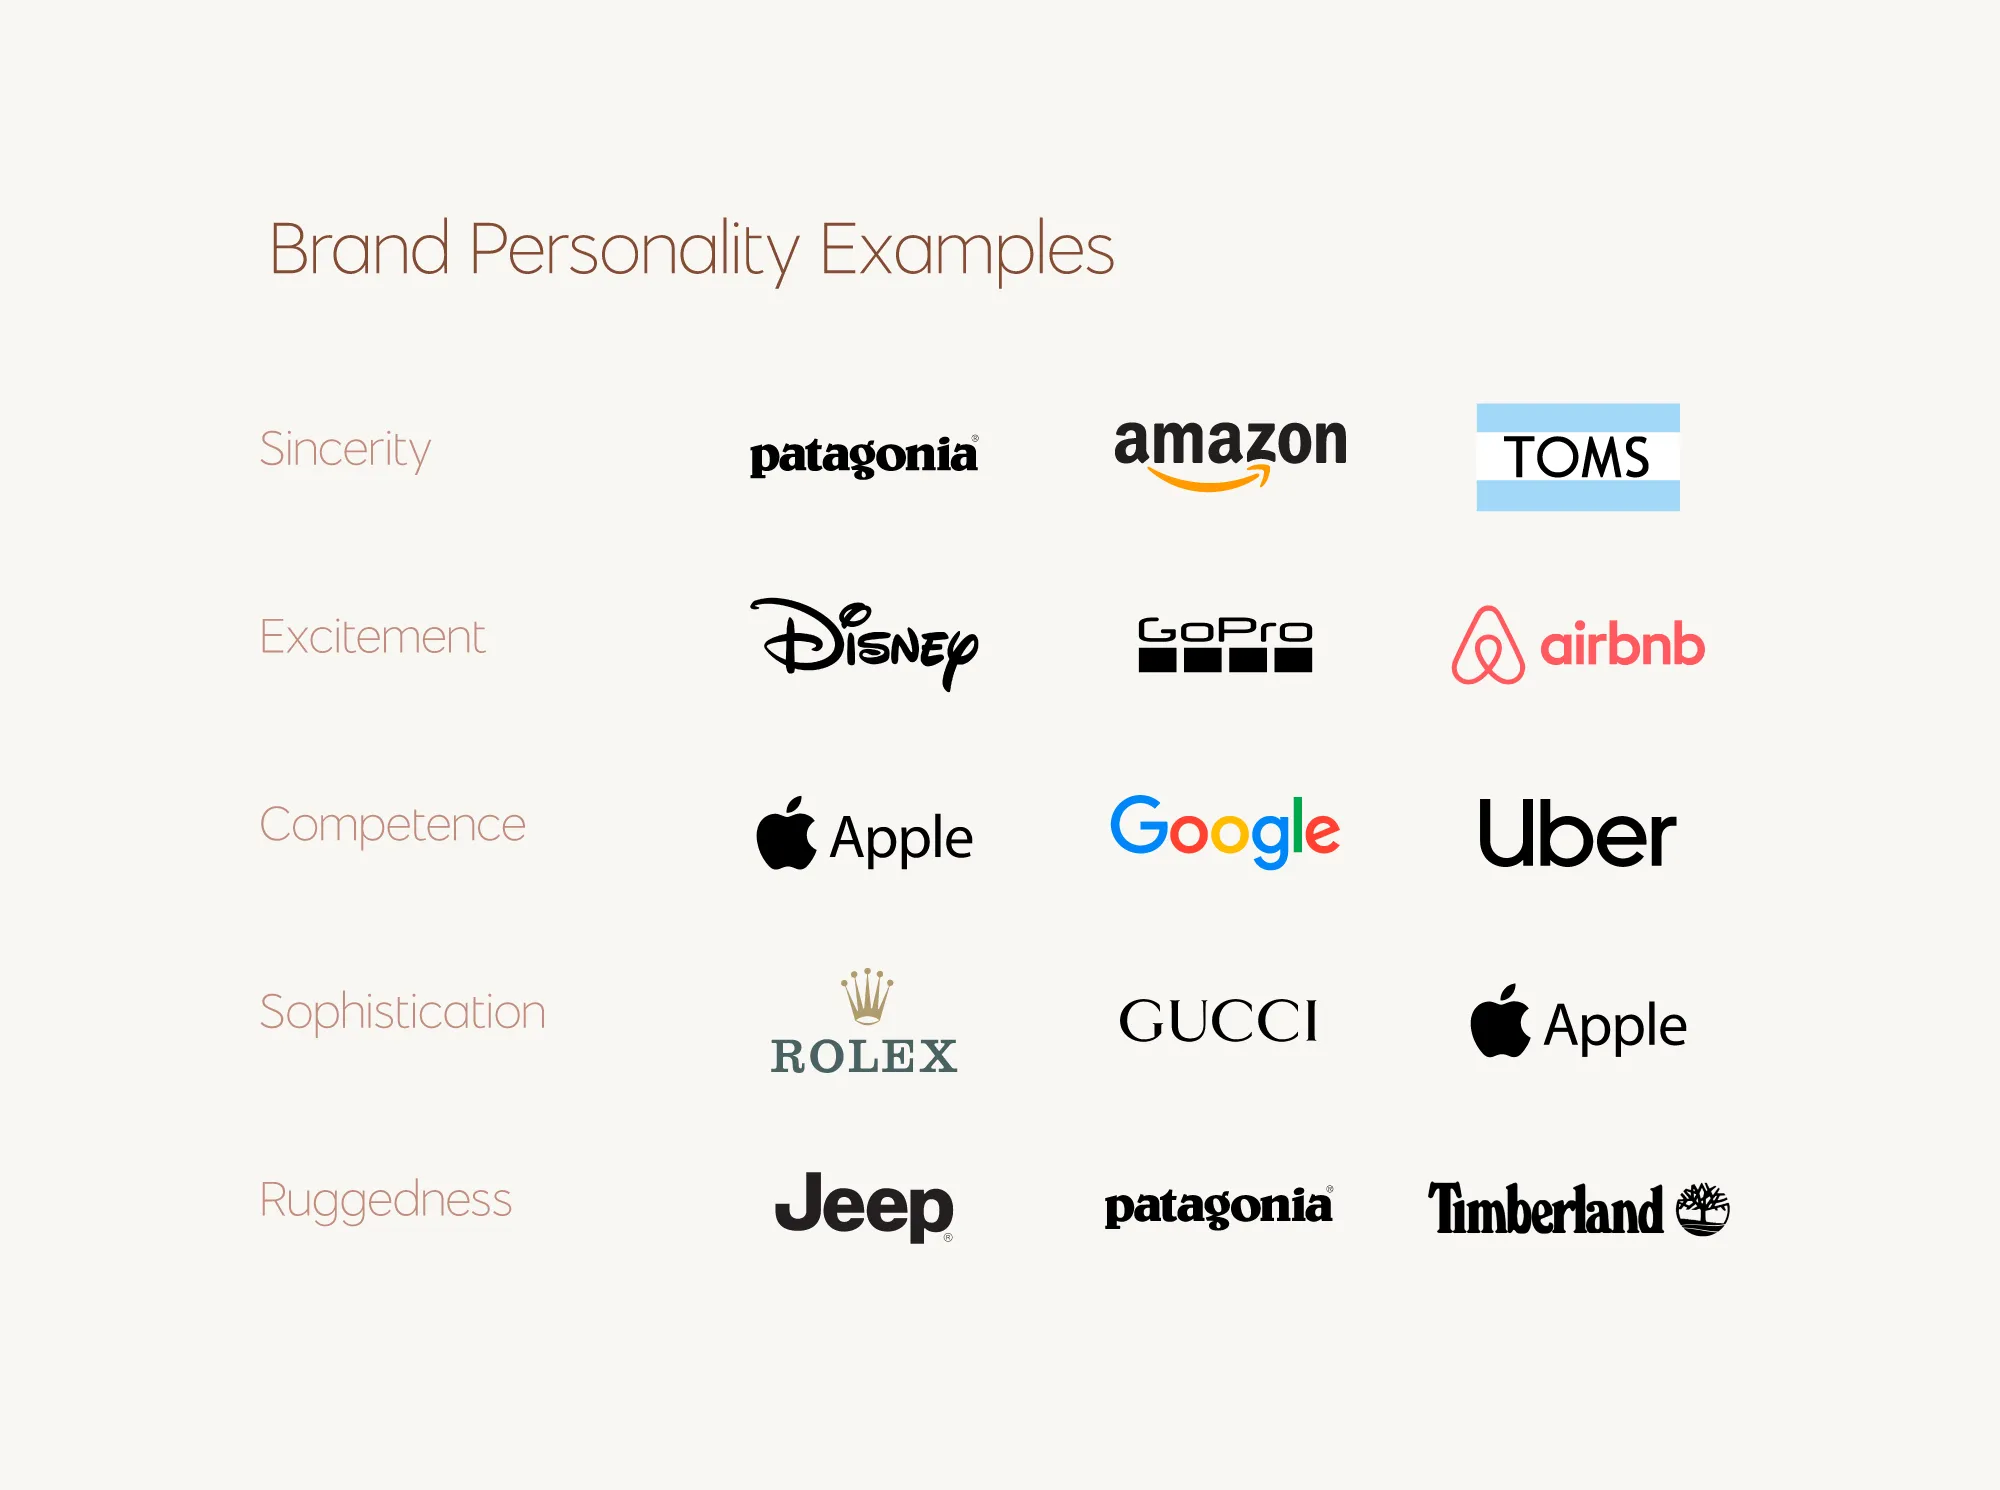 Famous brands examples of brand personality